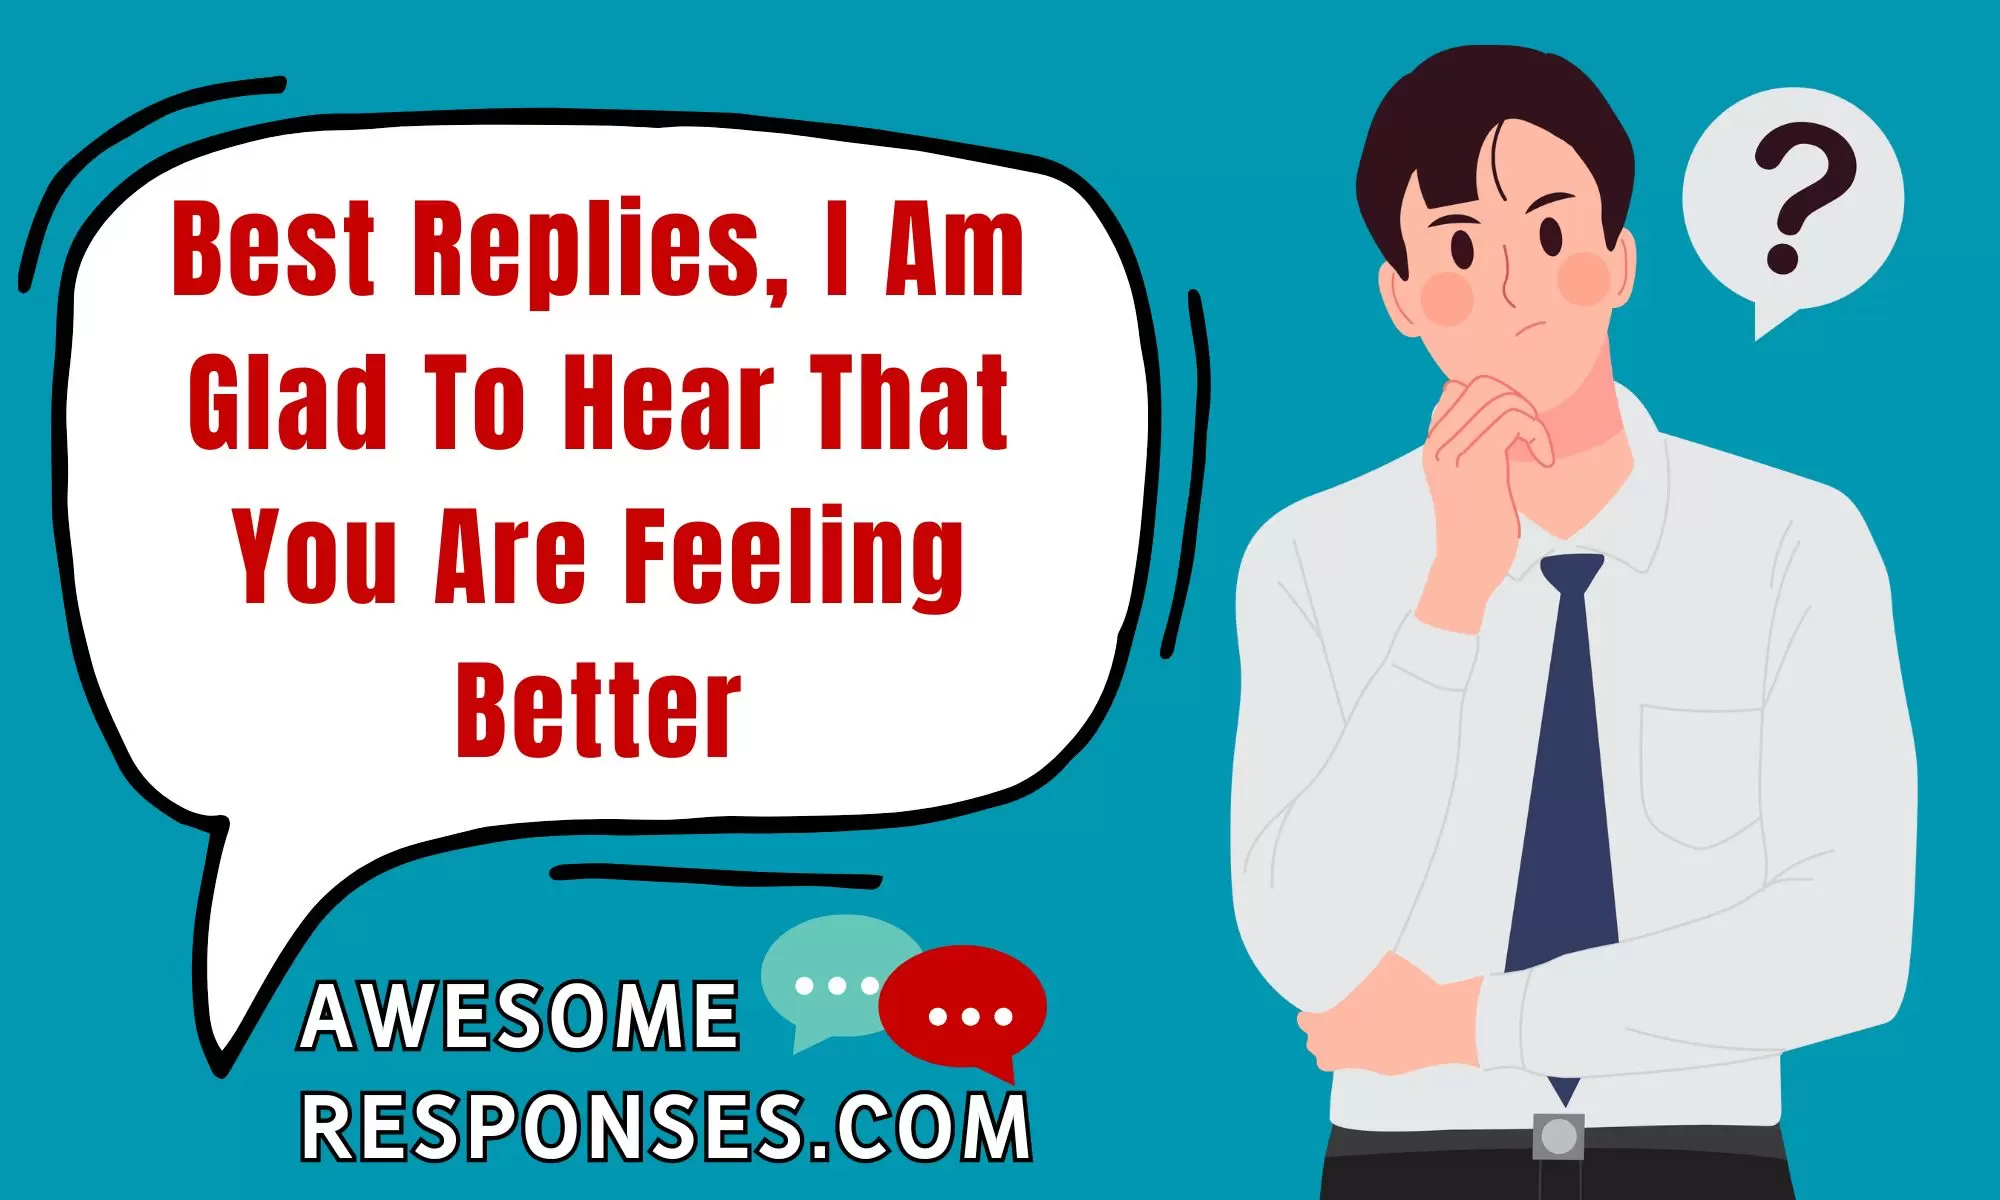 Best Replies, I Am Glad To Hear That You Are Feeling Better